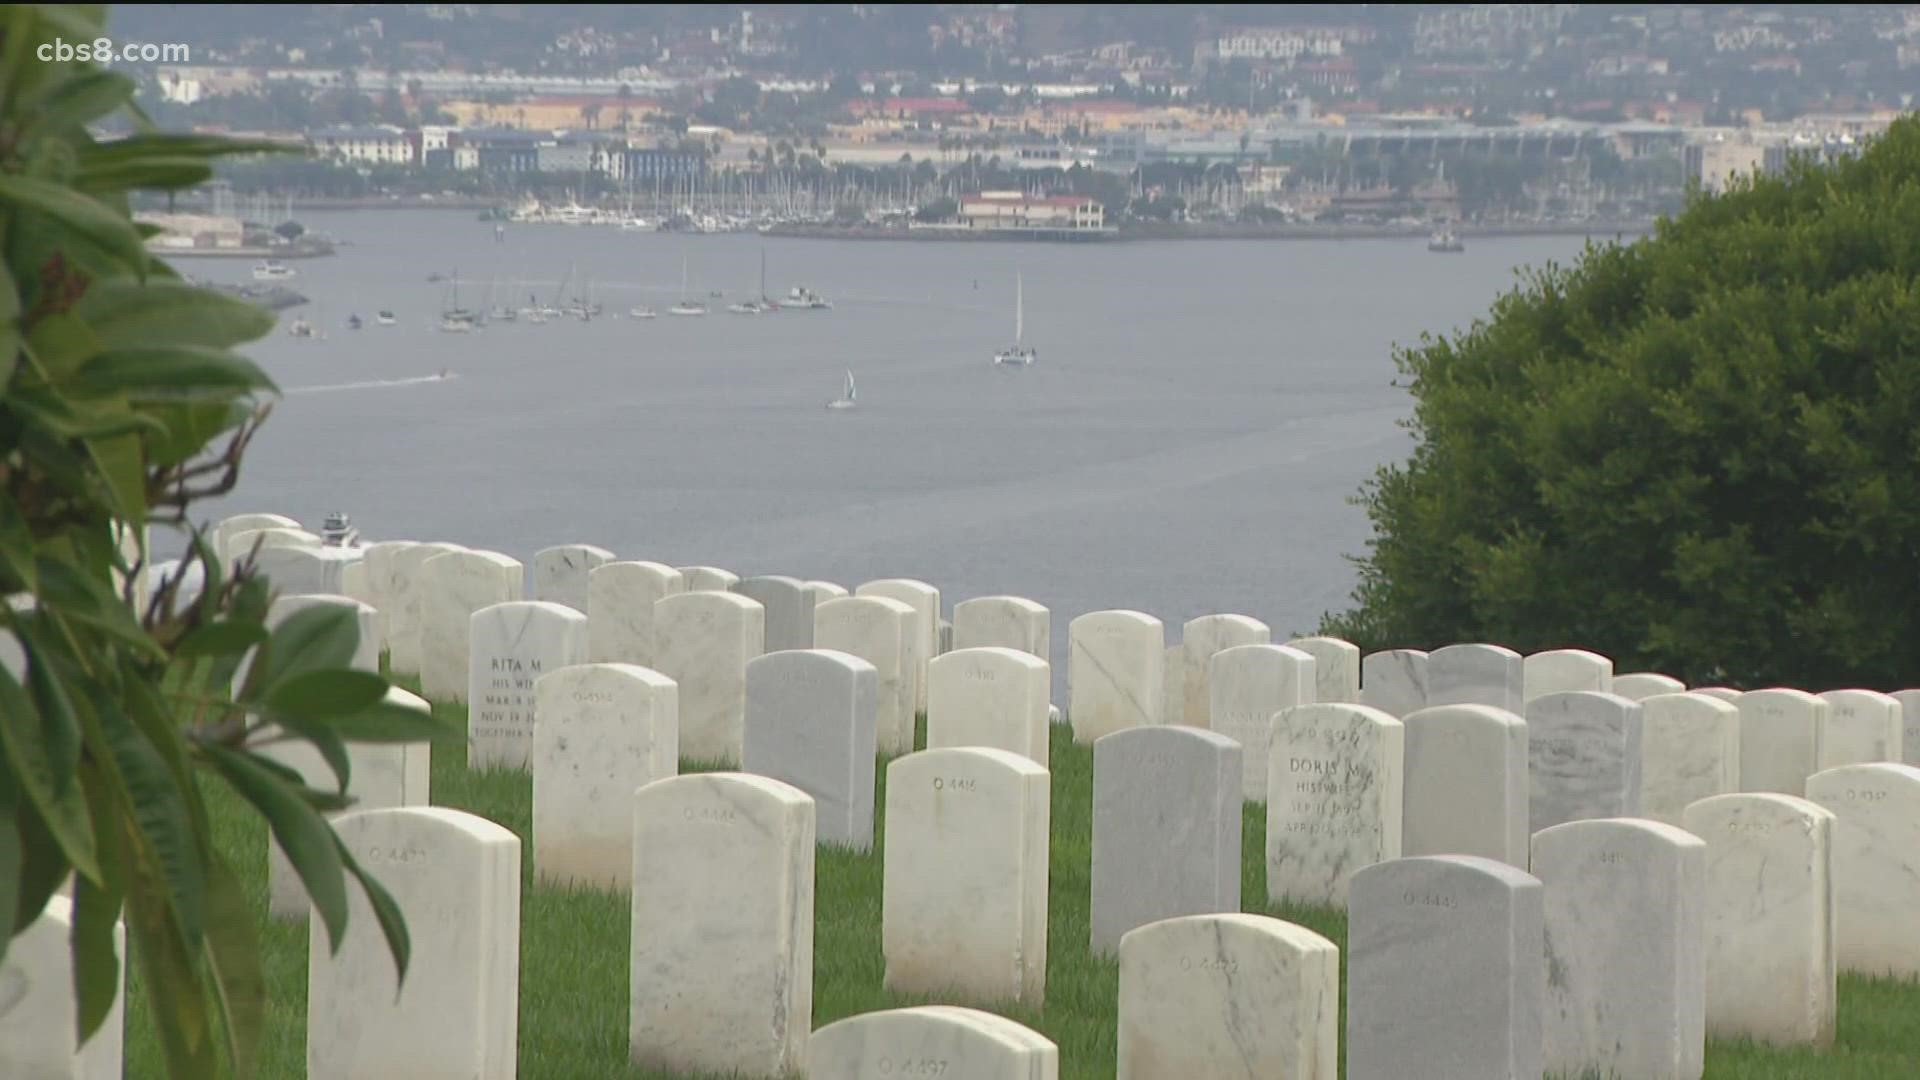 A Navy veteran, who died in the Pearl Harbor attack, has been laid to rest in San Diego.